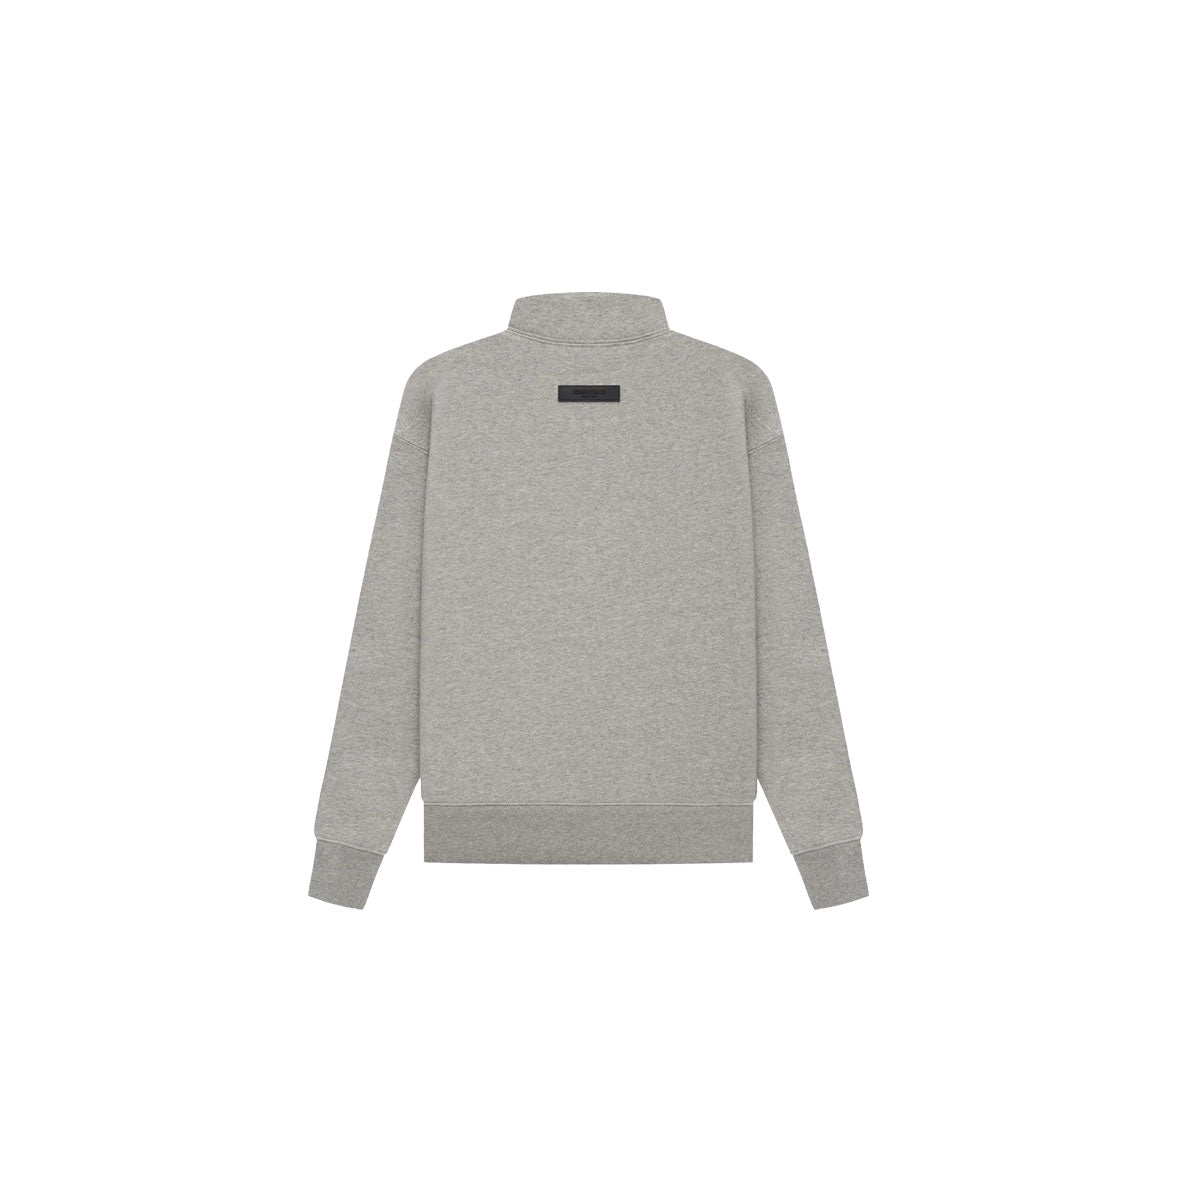 KIDS ESSENTIALS MOCKNECK - Why are you here?